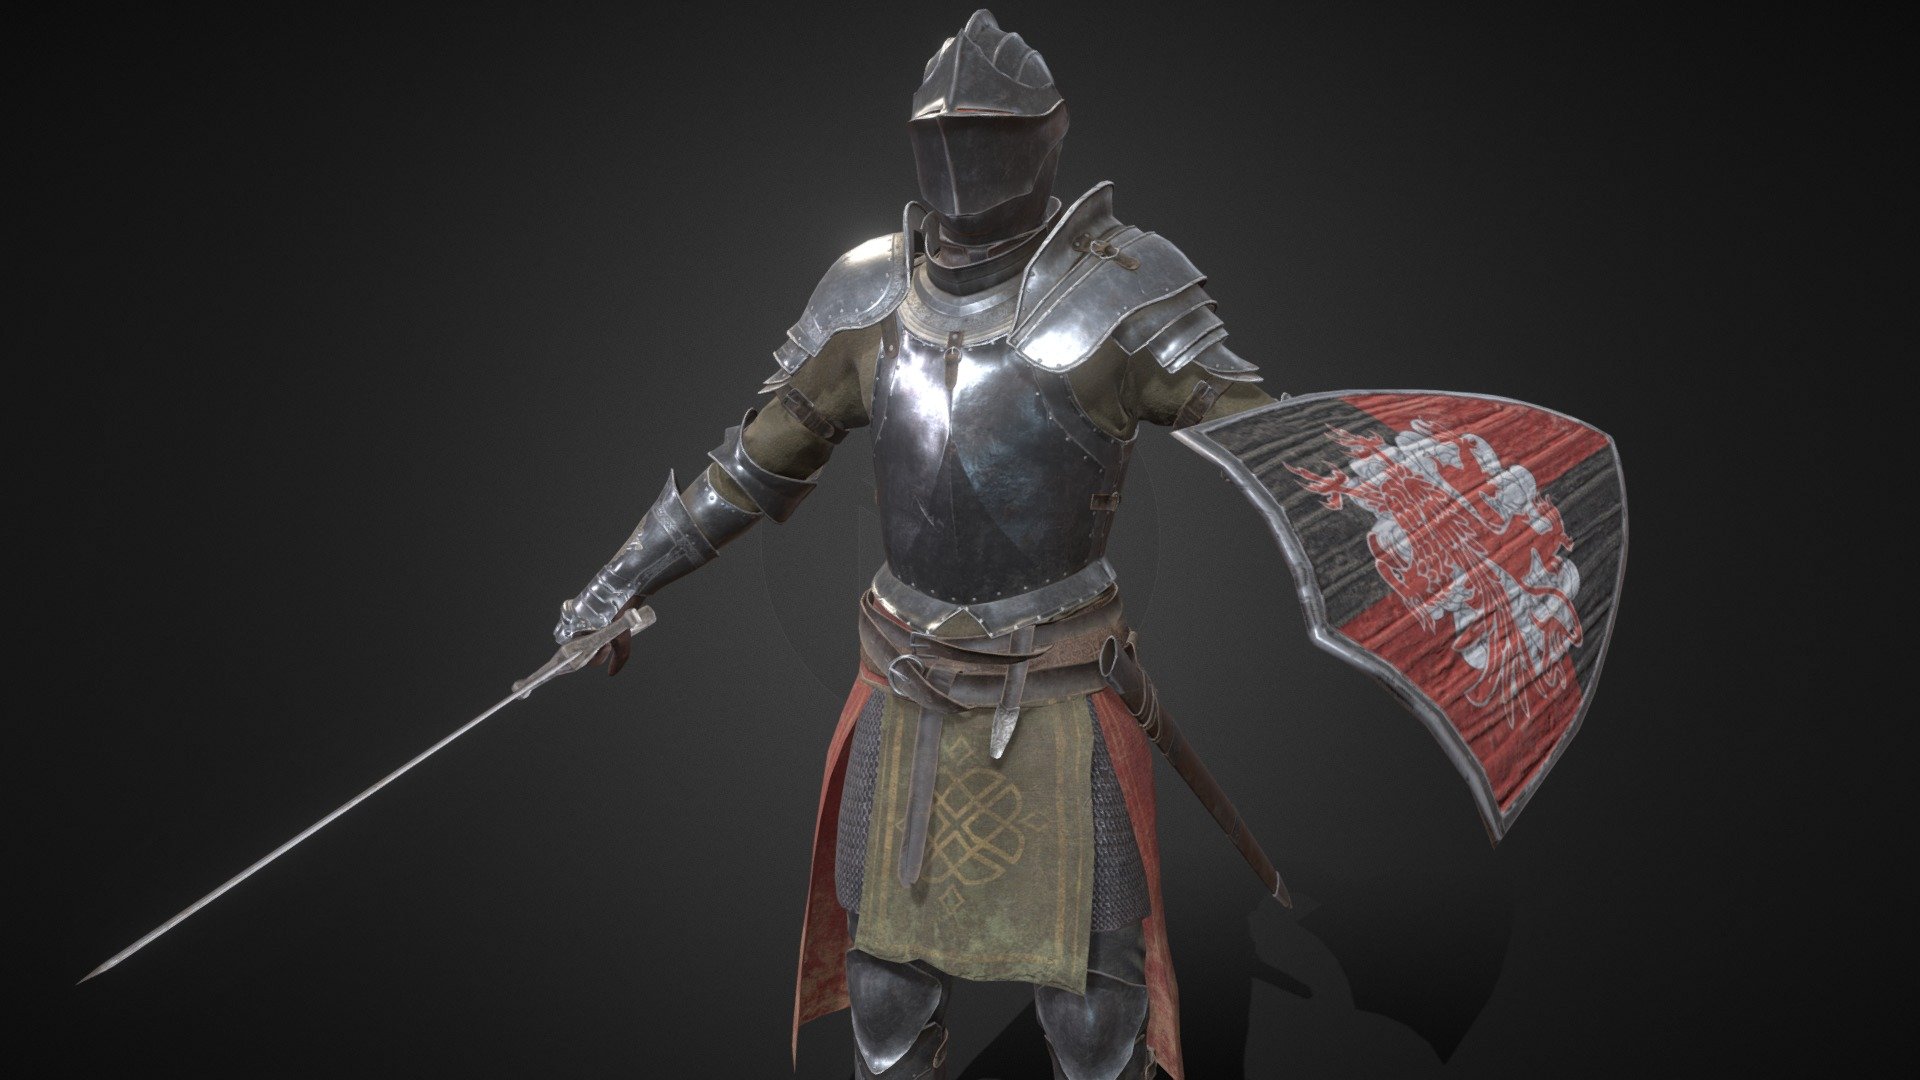 Knight model in medieval style